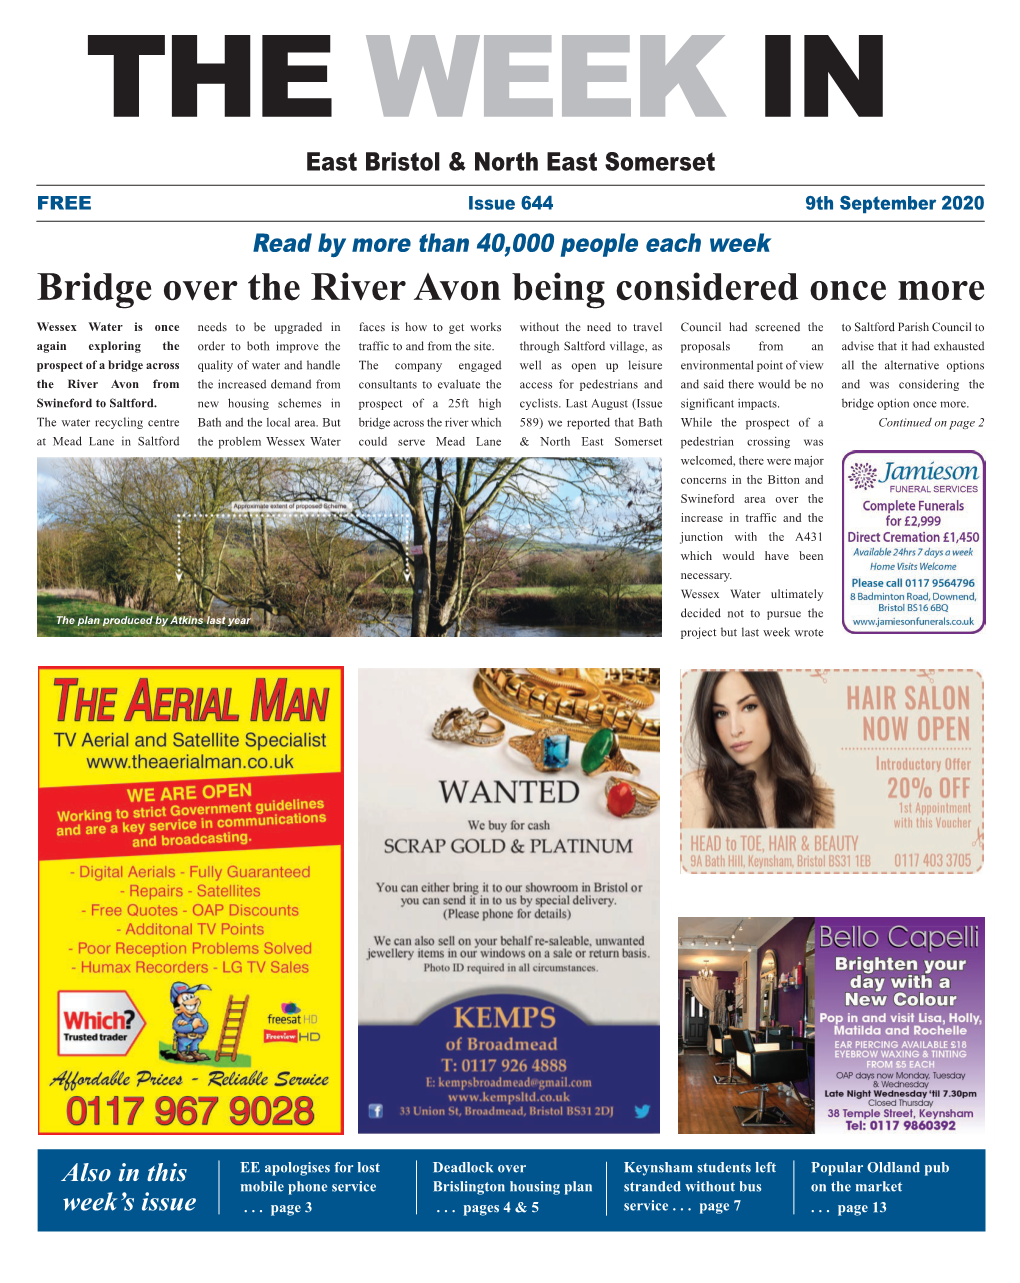 Bridge Over the River Avon Being Considered Once More